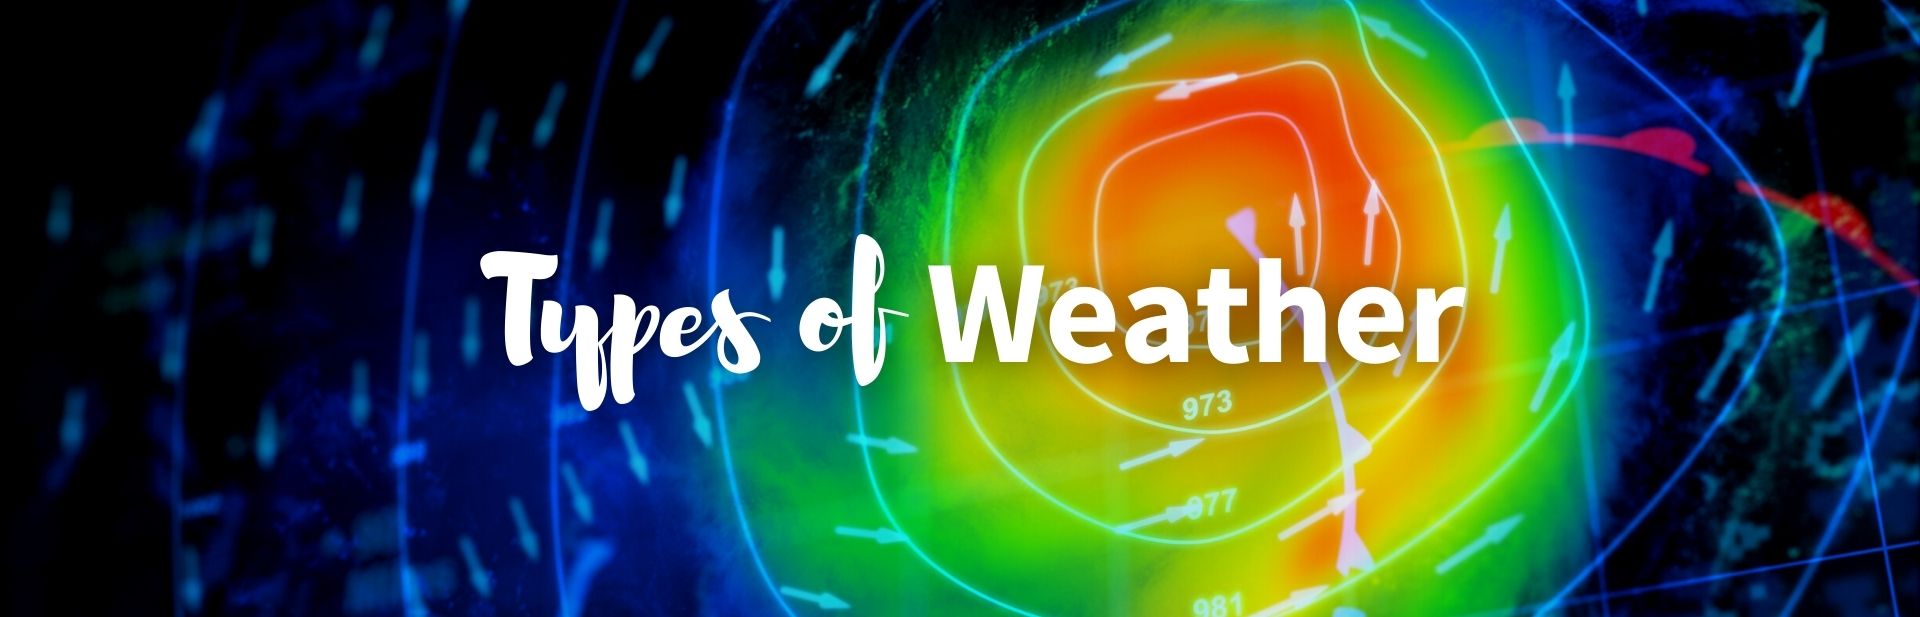 9 Different Types of Weather: Facts, Definitions and Forecasting